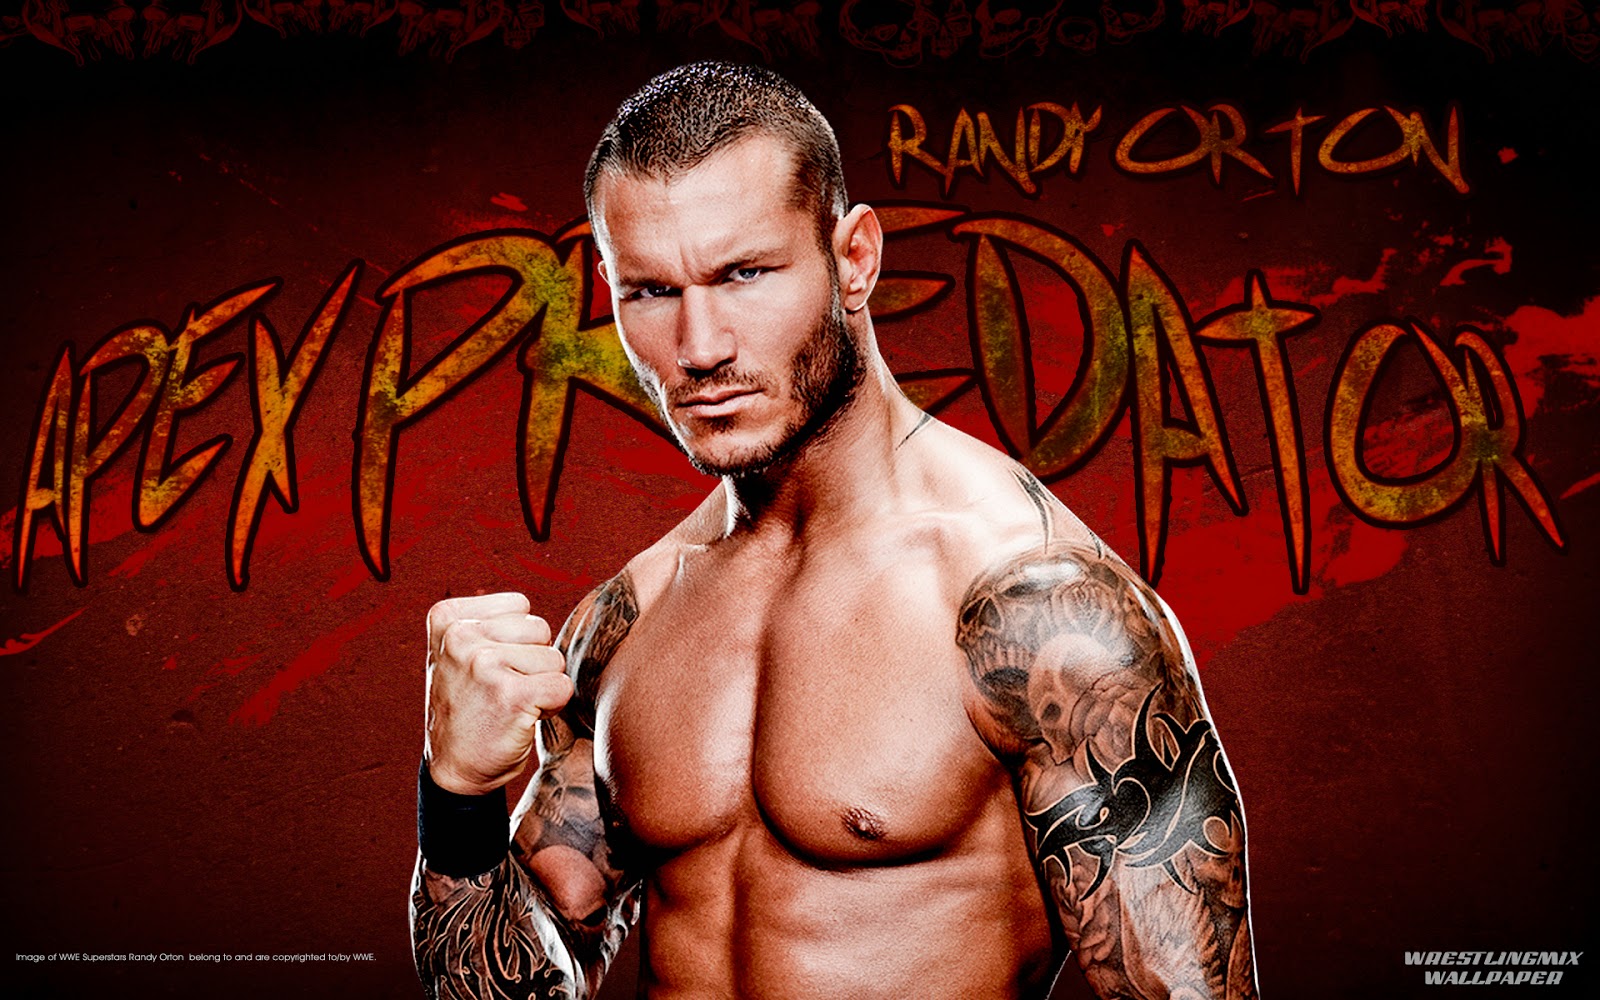 Randy Orton, WWE, Wallpaper, Photo, Images, Pics, Pictures, Widescreen, photograph, Fullscreen, Free Download Wallpapers